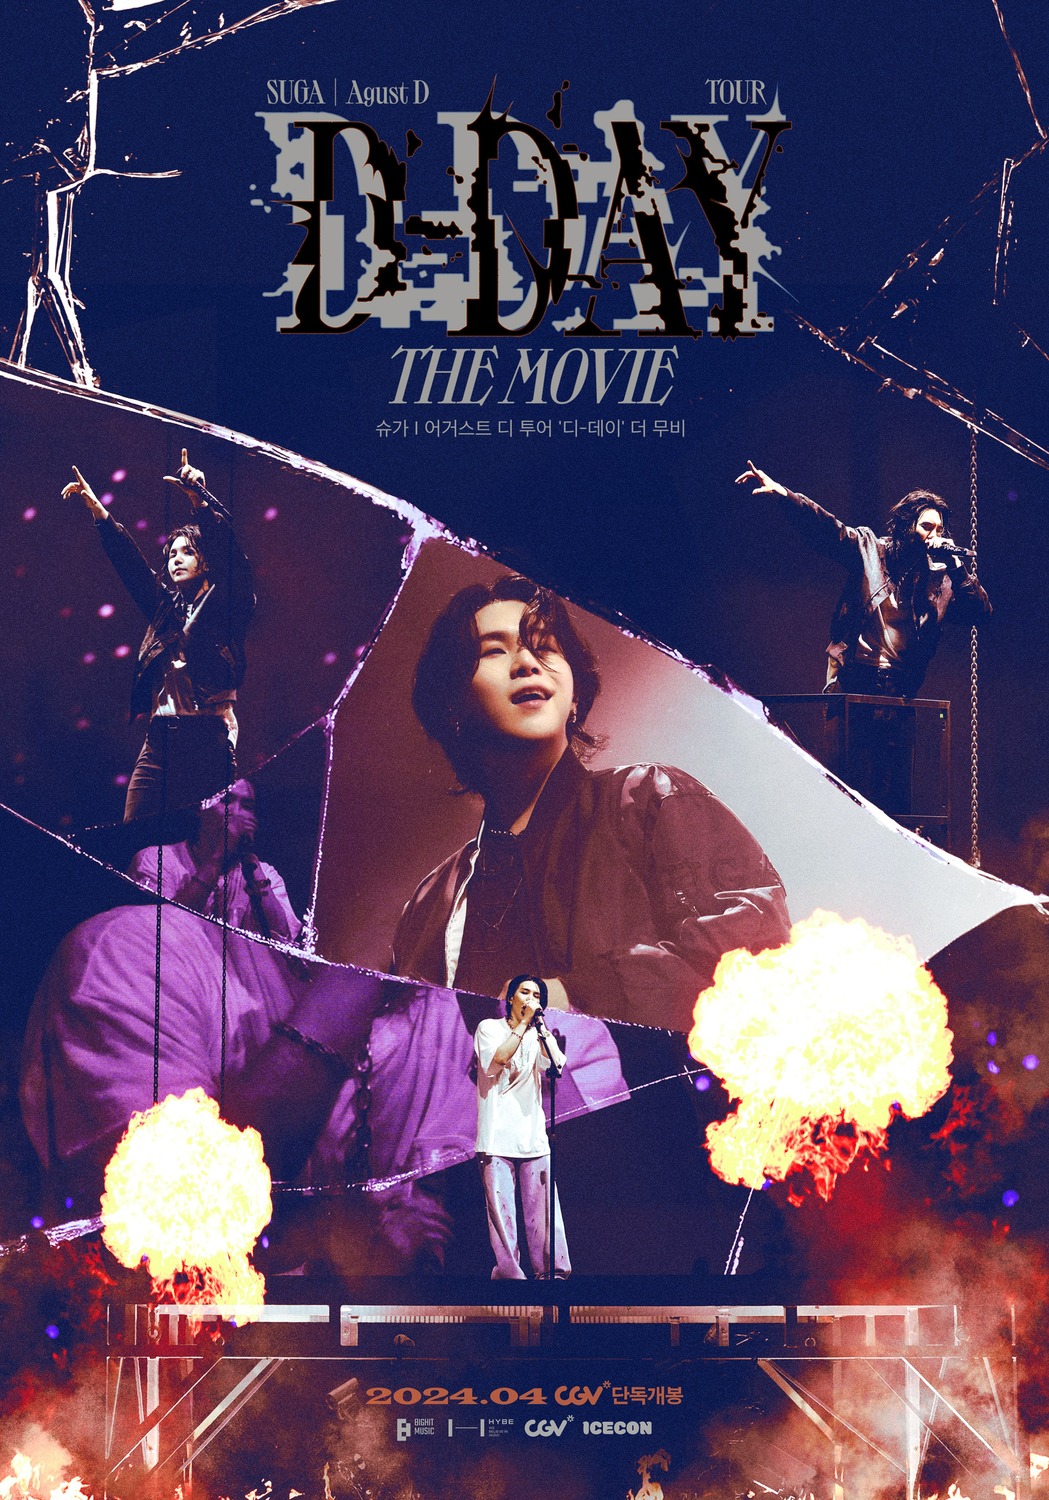 Extra Large Movie Poster Image for SUGA | Agust D TOUR 'D-DAY' THE MOVIE 